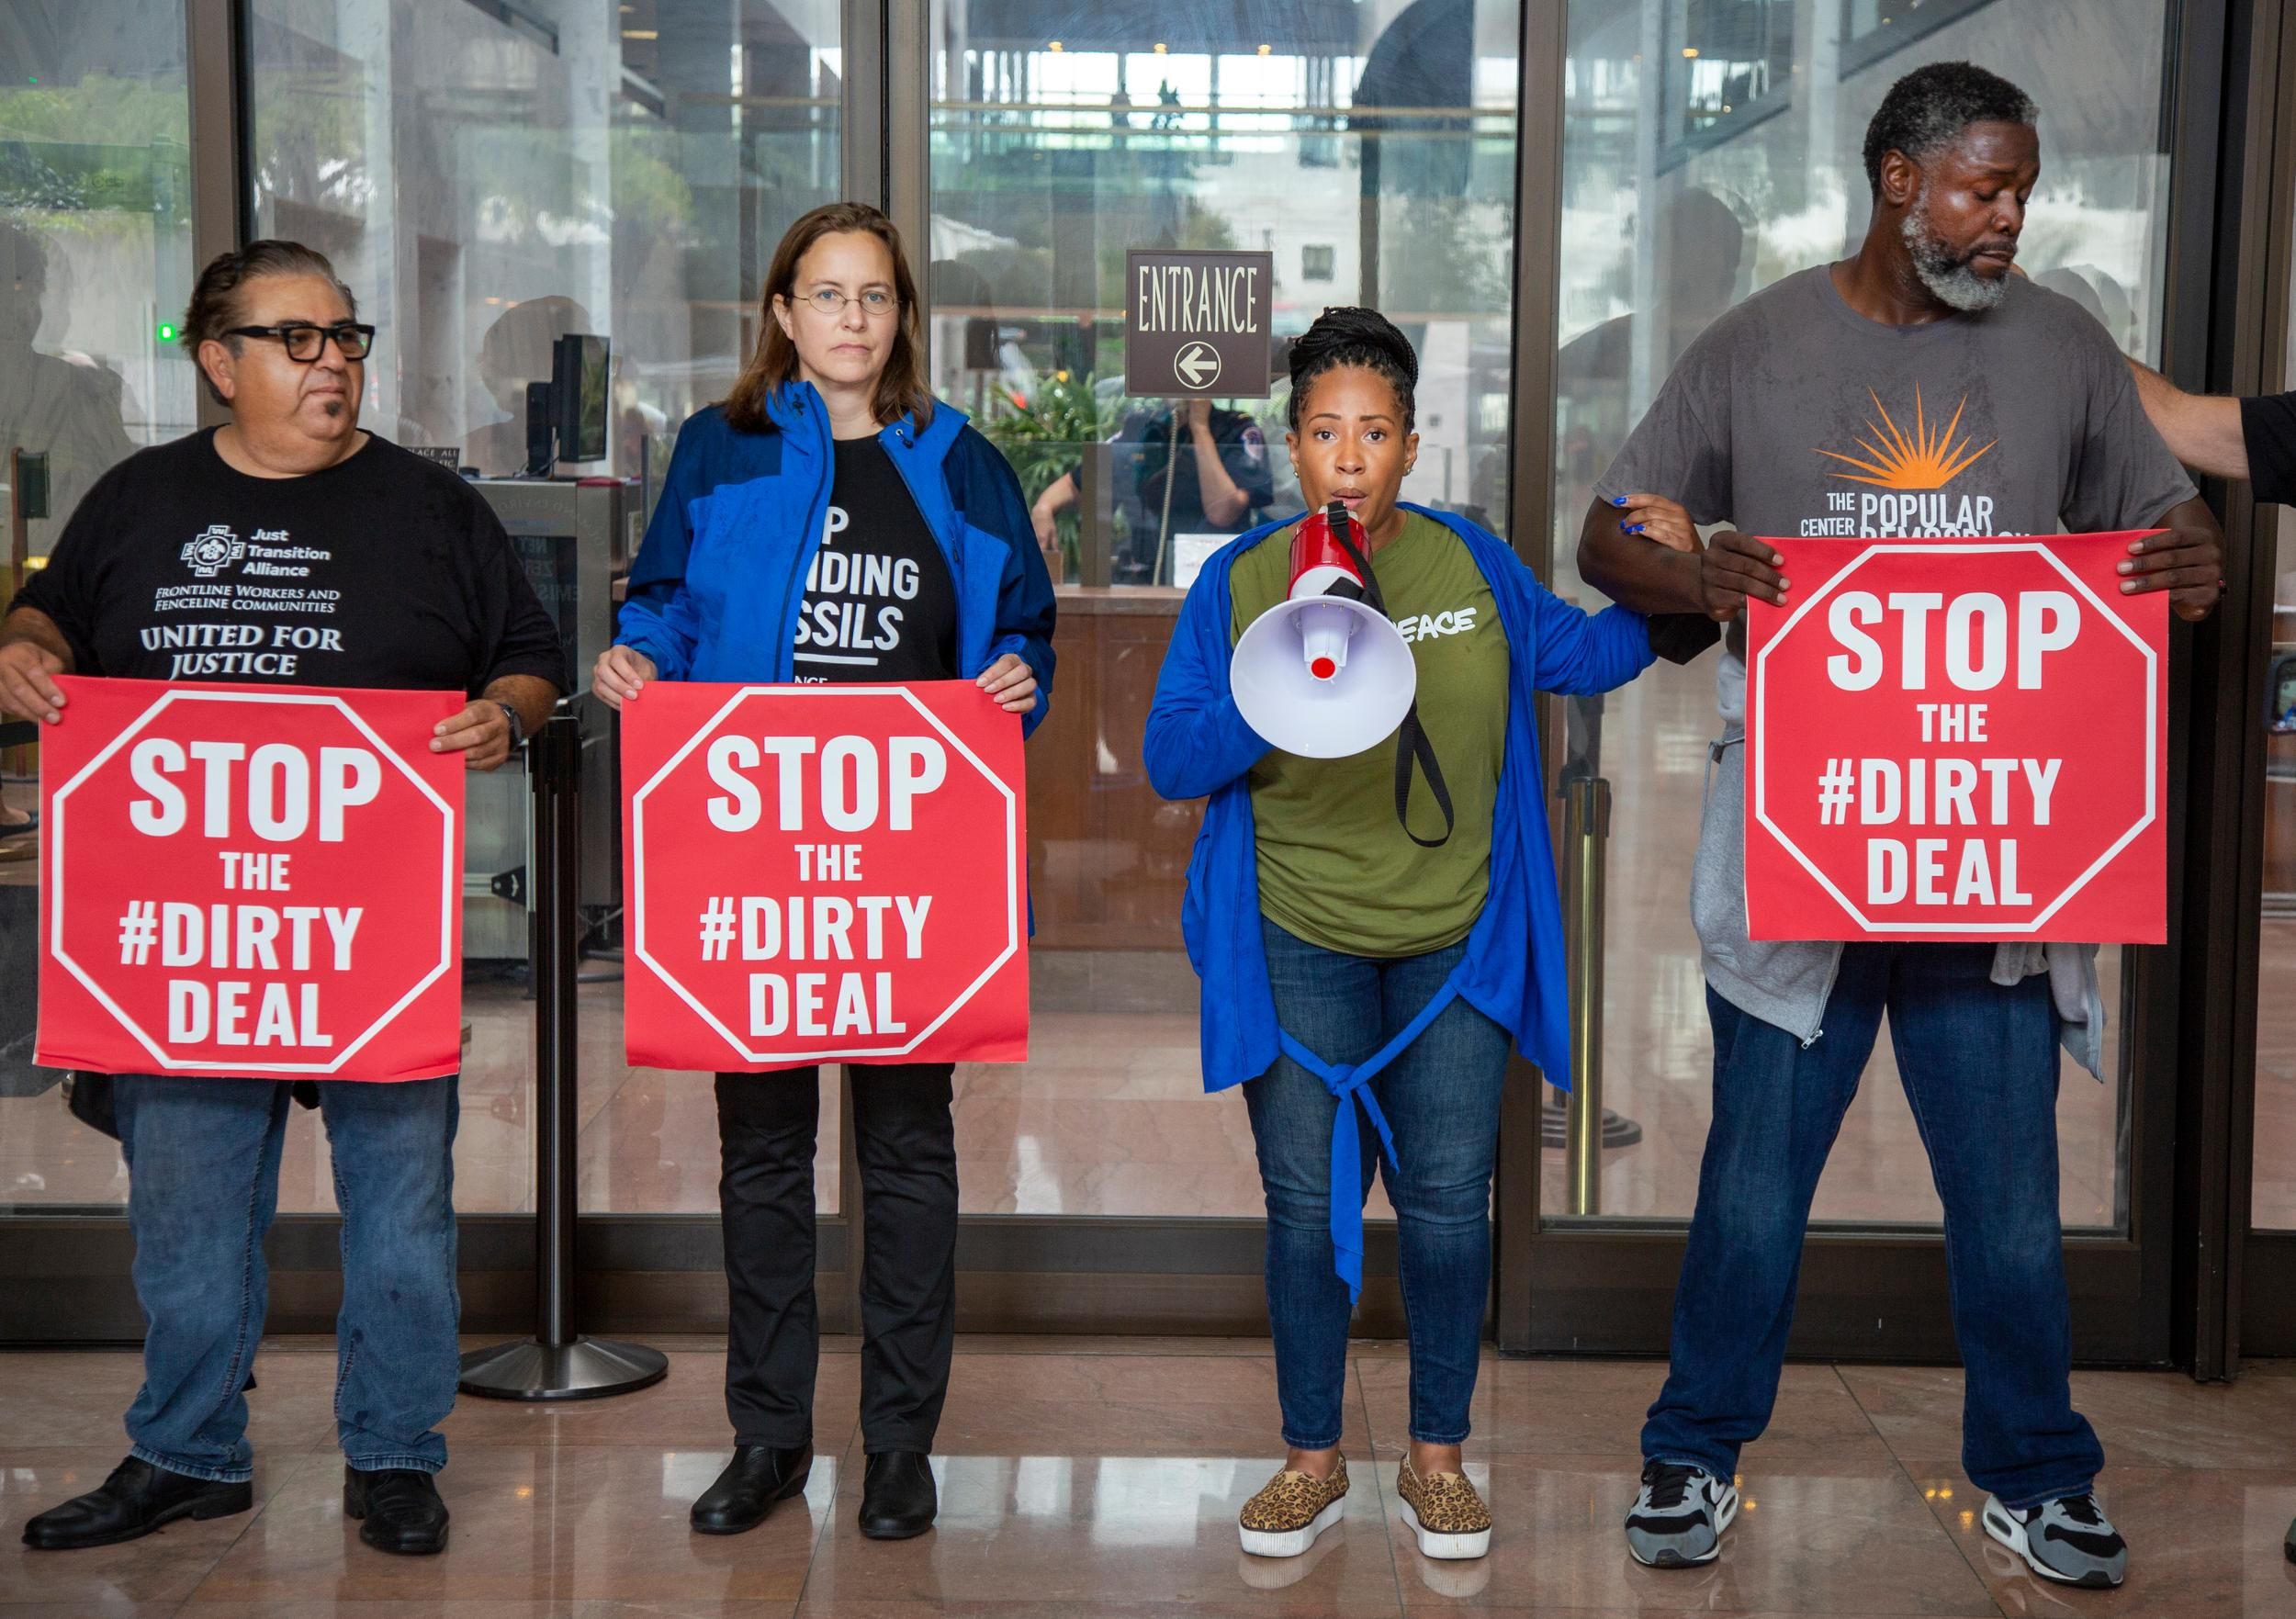 Climate leaders risking arrest hold signs saying "Stop the #DirtyDeal"